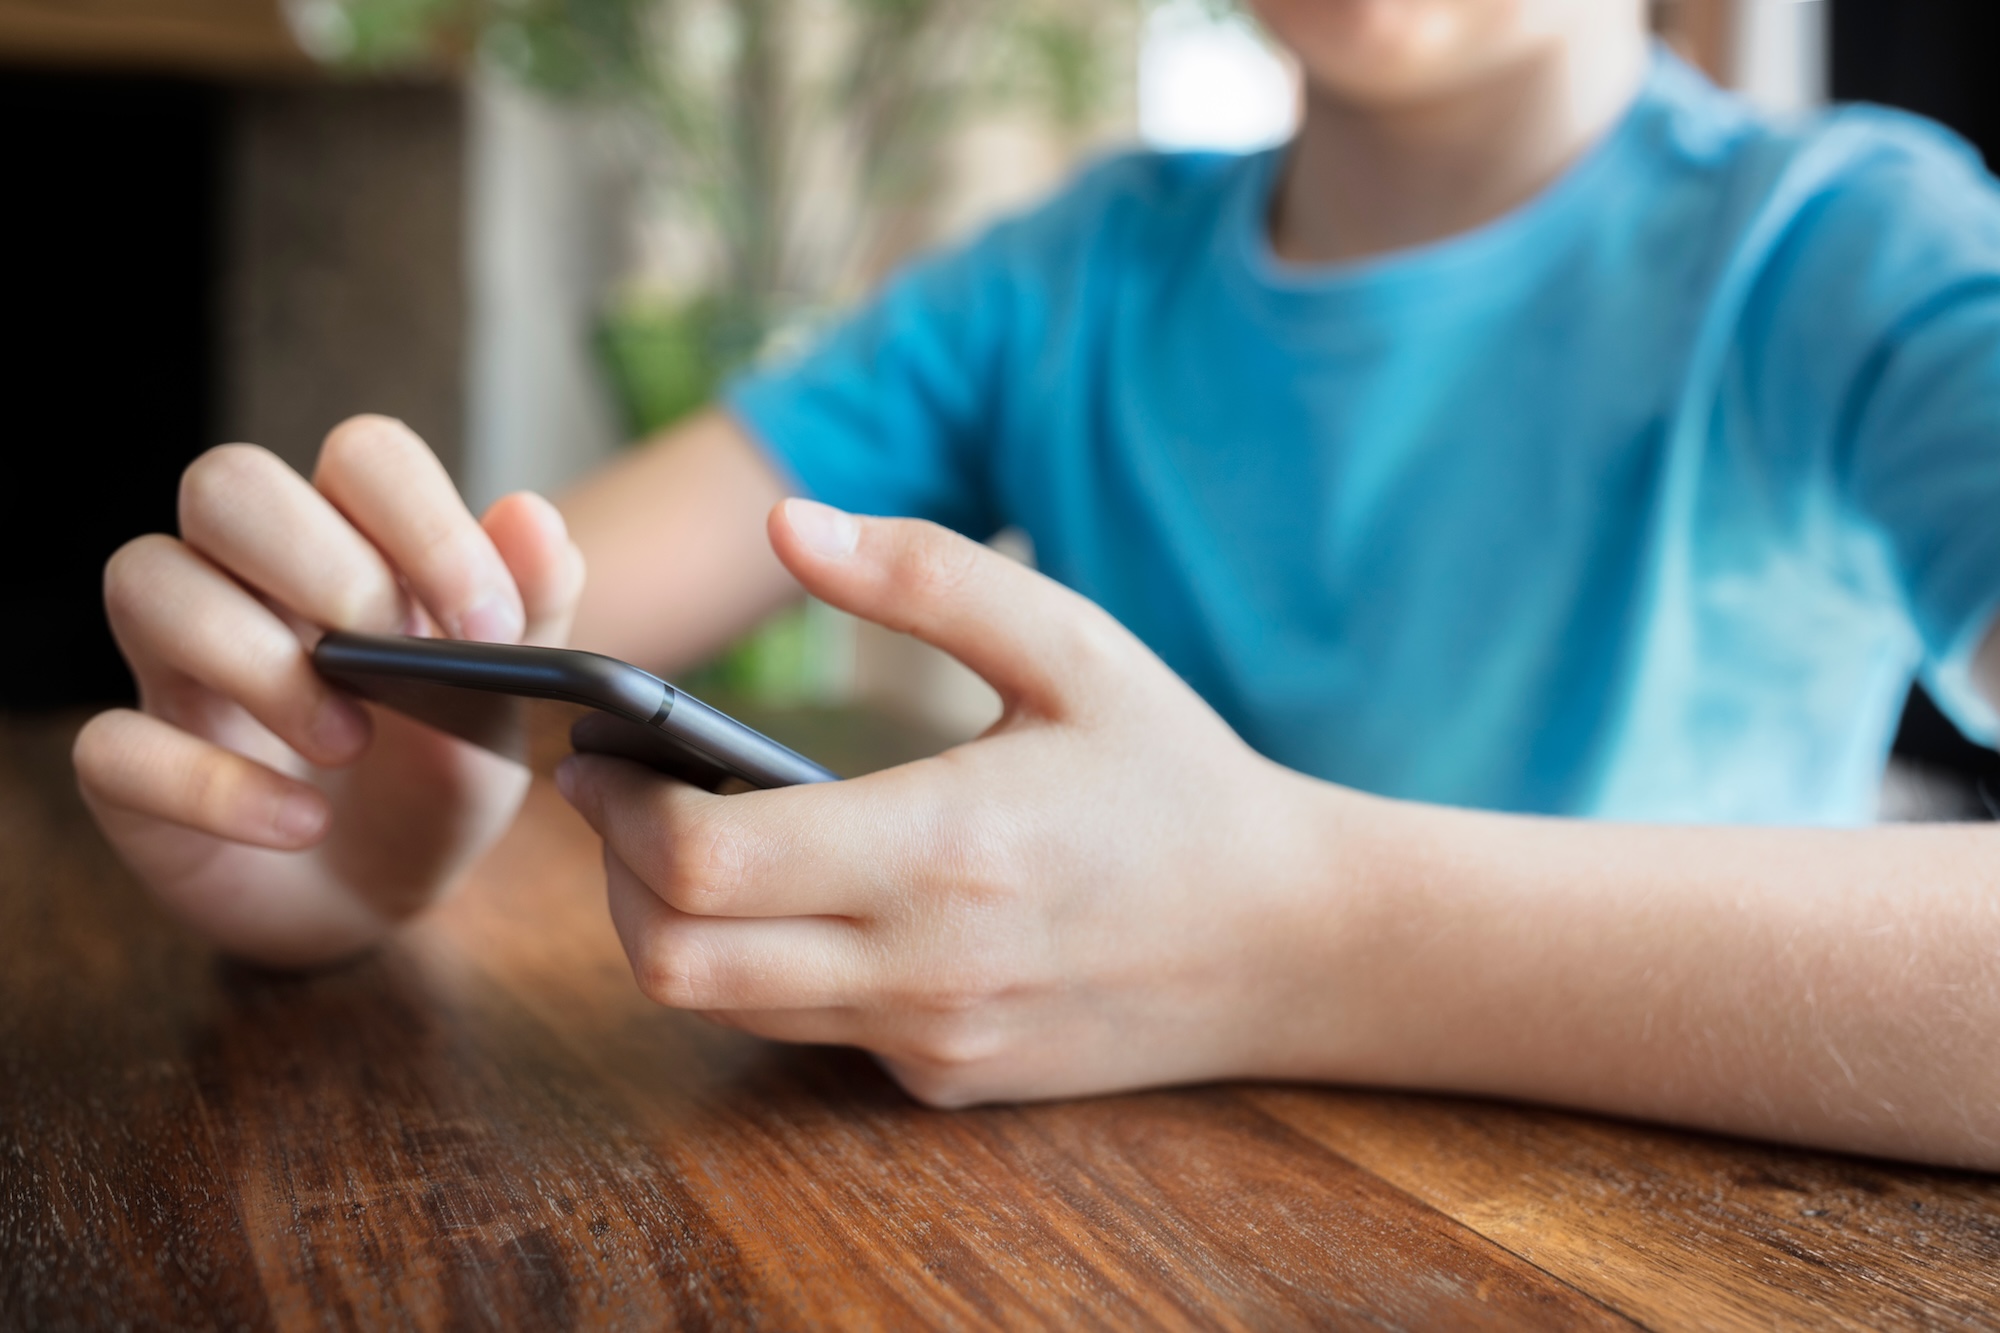 Children as young as 11 are victims of online fraud in Macao